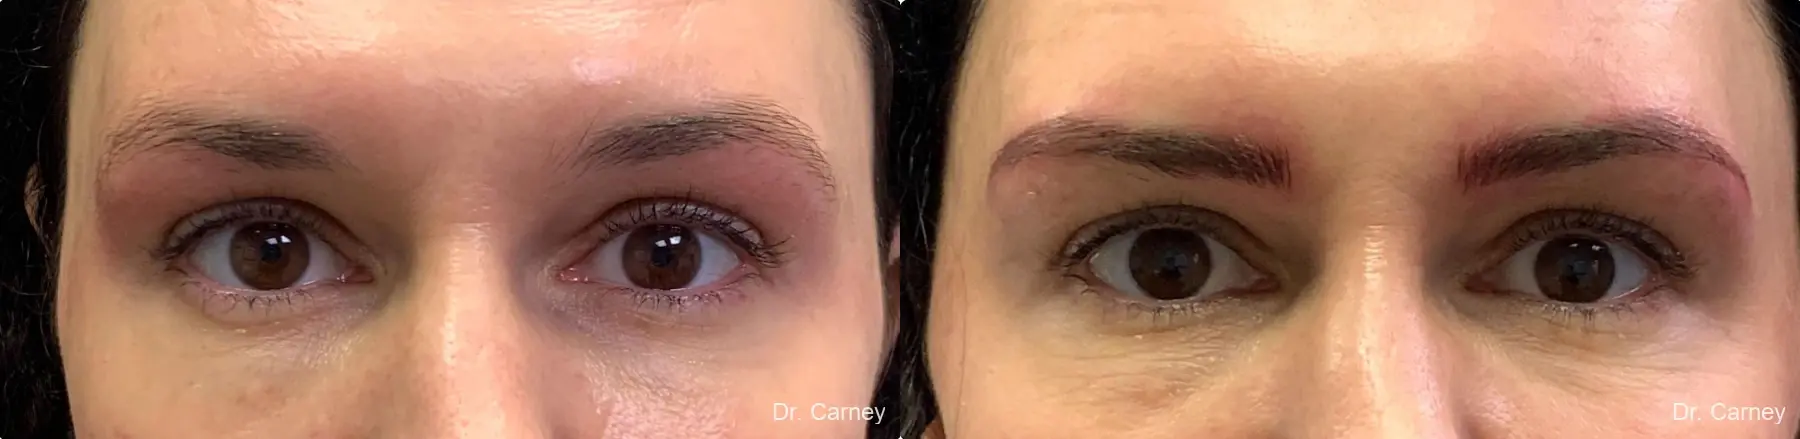 Microblading: Patient 1 - Before and After  